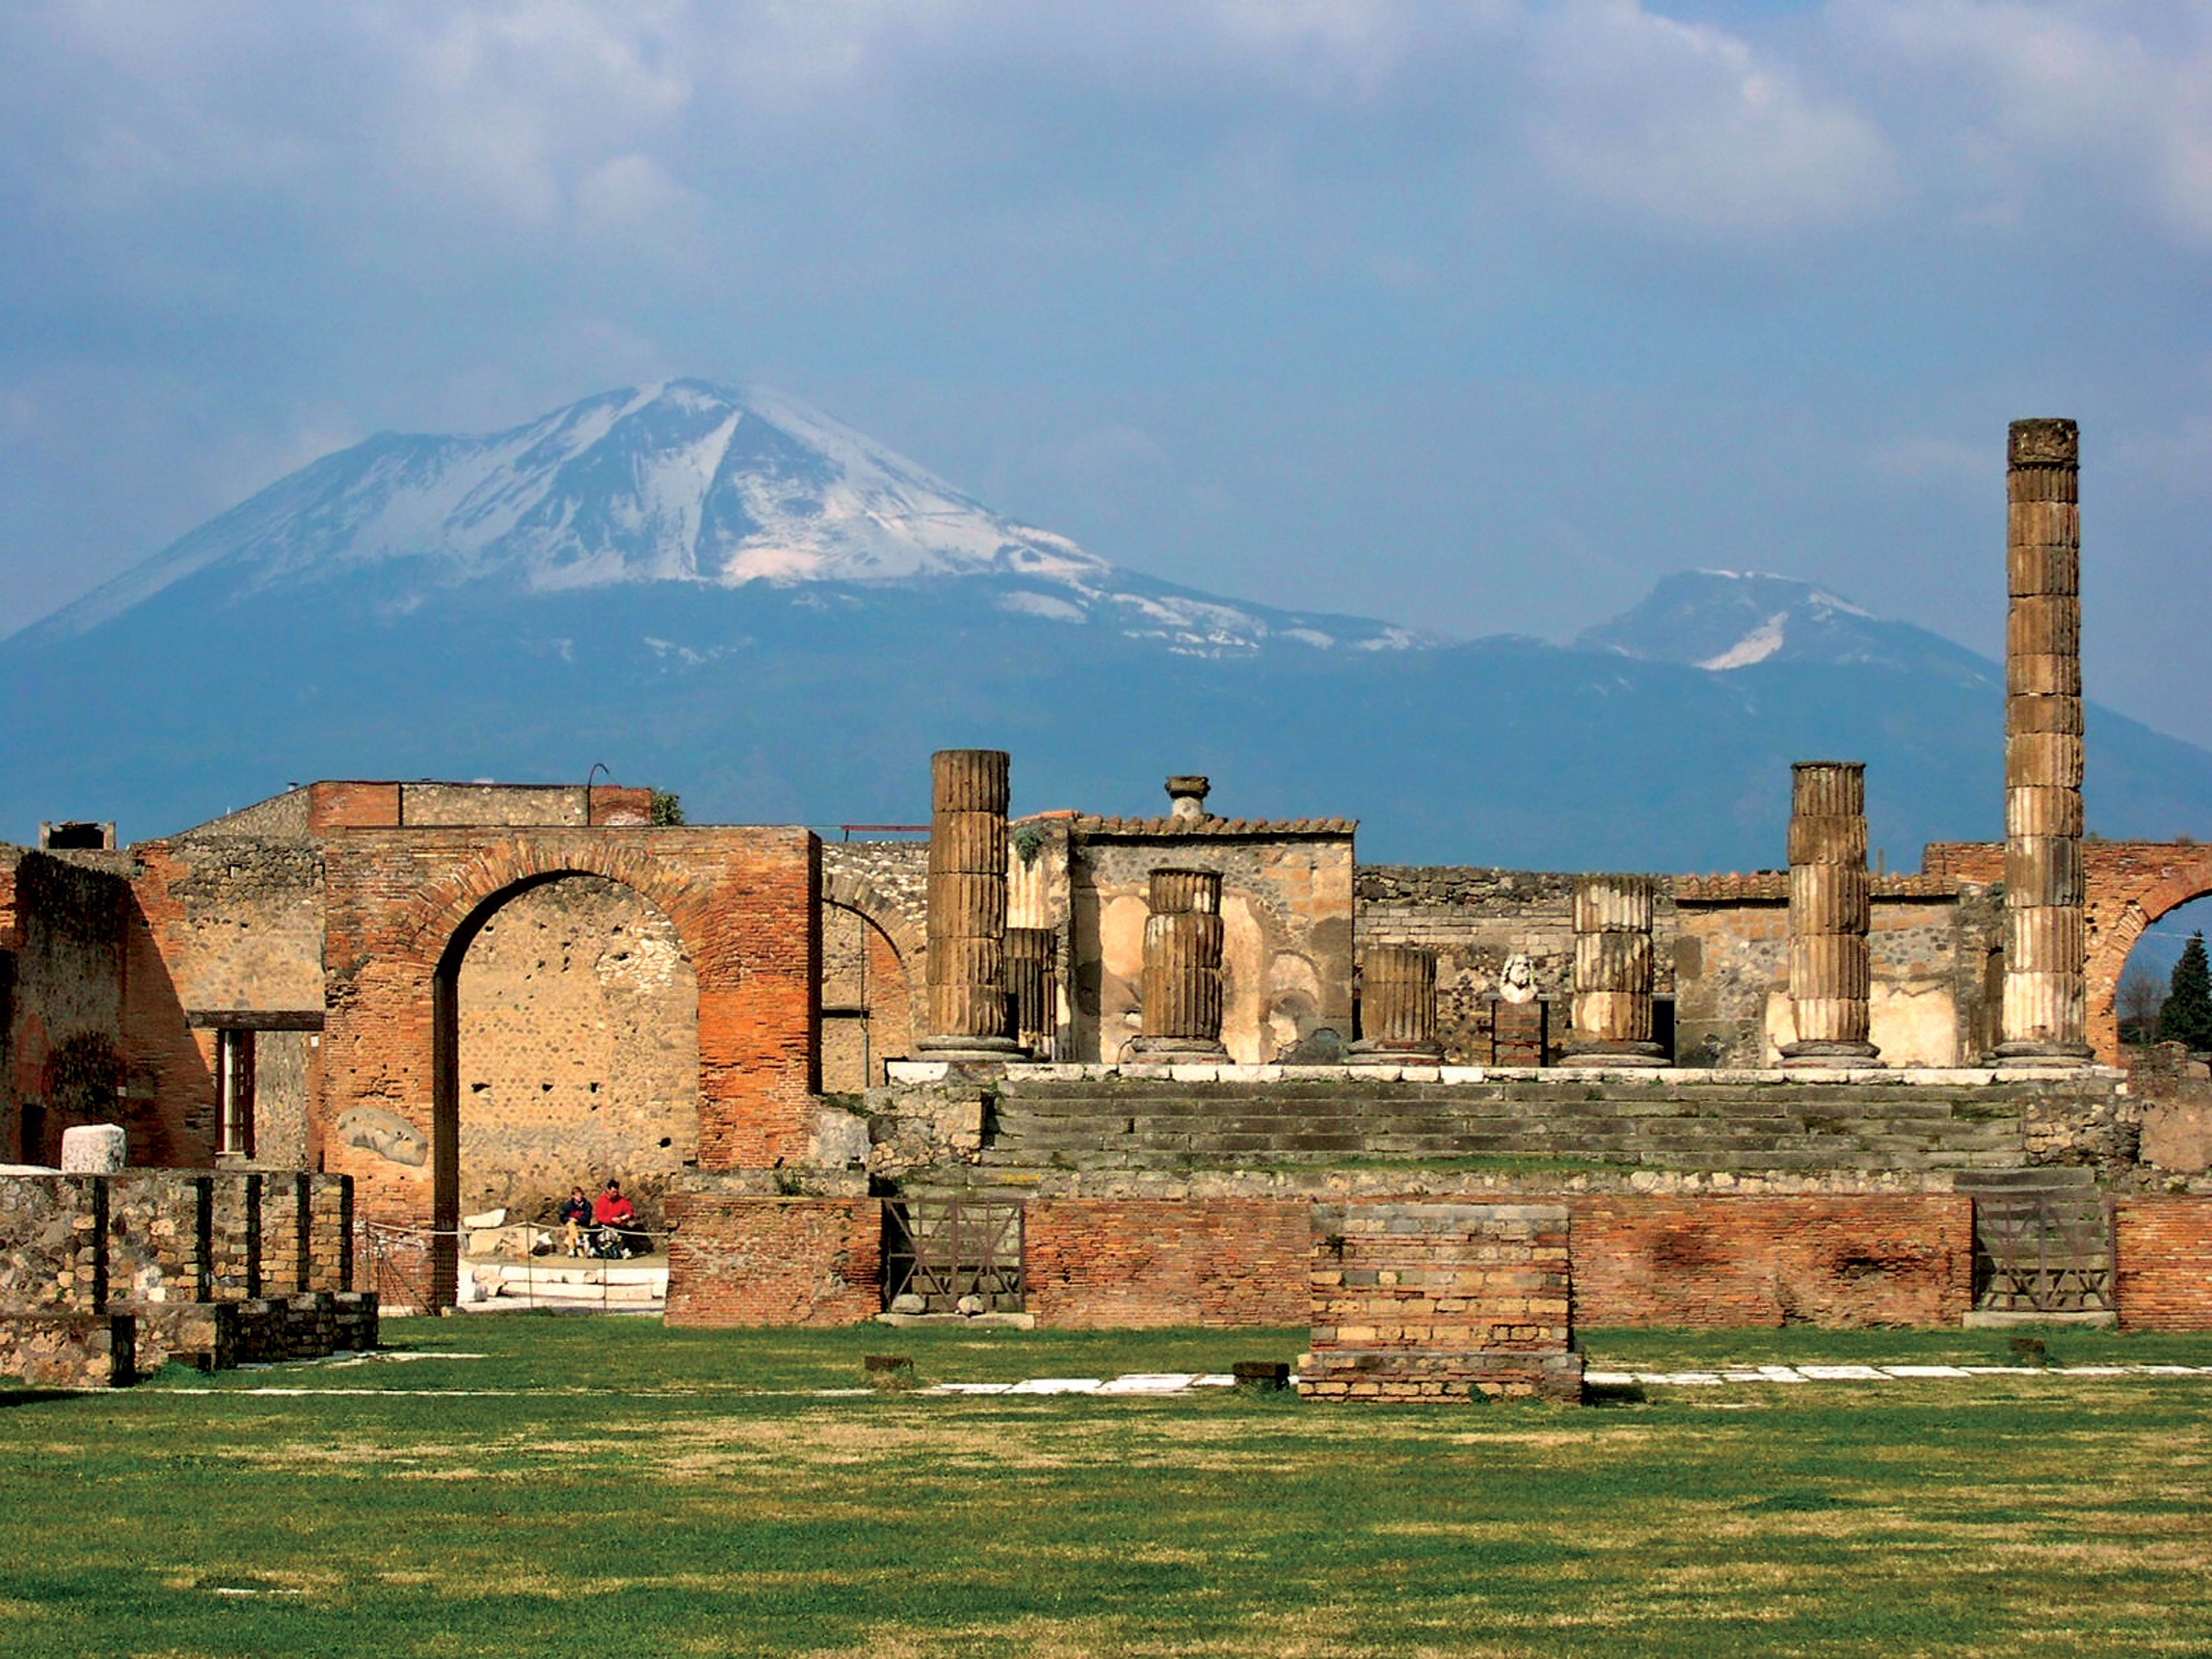 The ruins of Pompeii, with Mt. Vesuvius in the distance